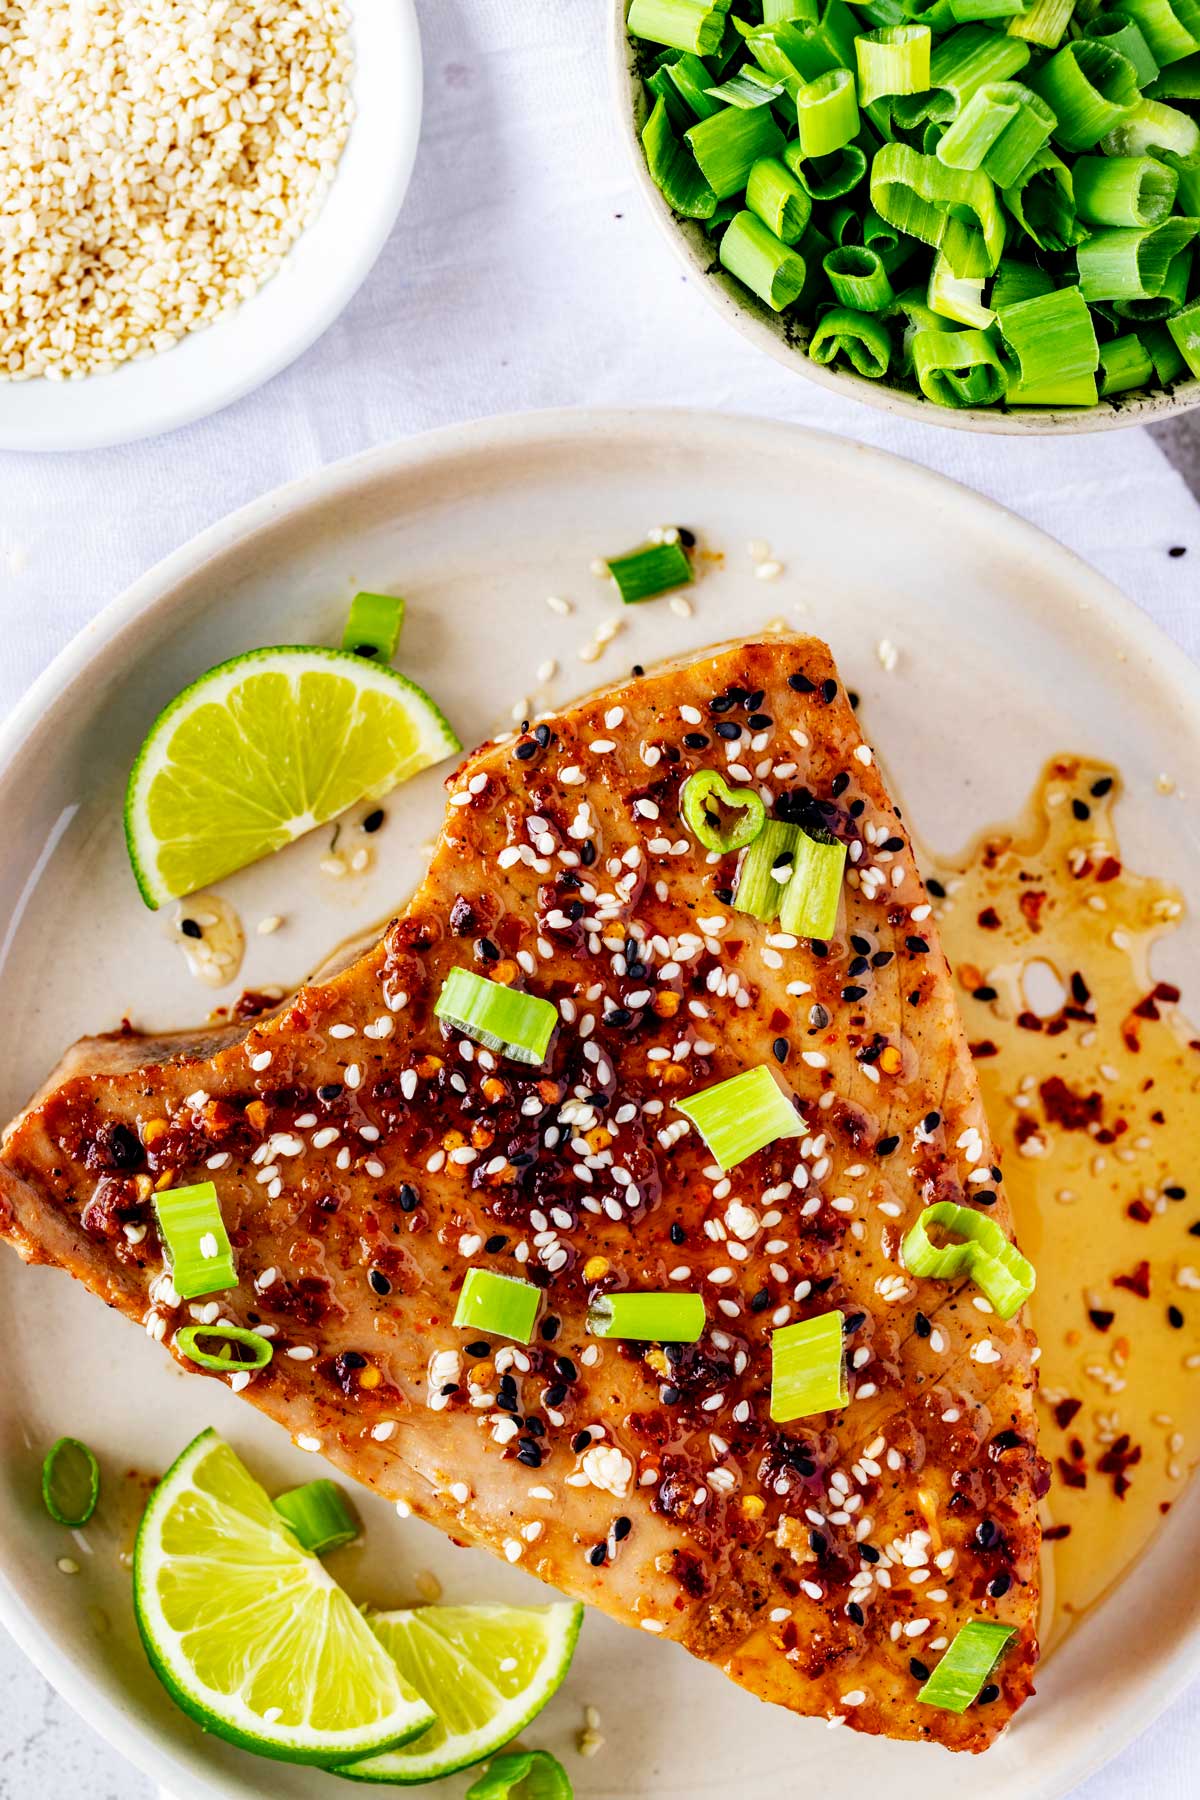 Overhead photo of air fryer tuna steak on a plate with a sesame ginger sauce garnished with scallions and sesame seeds.